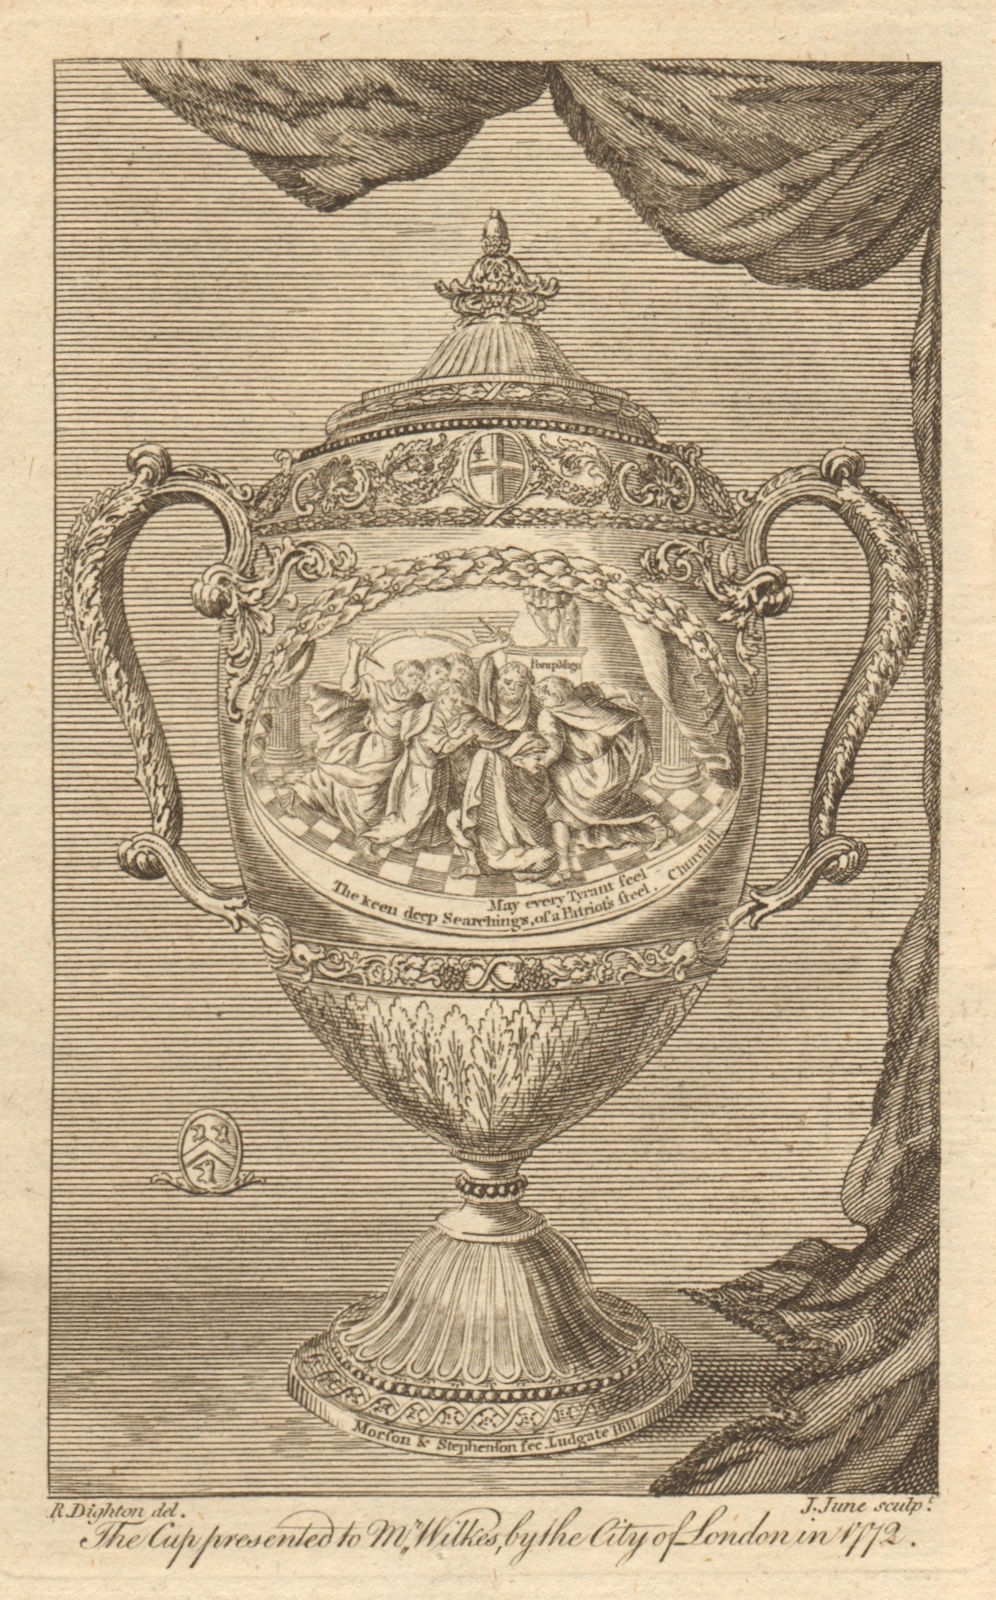 Associate Product The cup presented to John Wilkes by the City of London in 1772 1774 old print